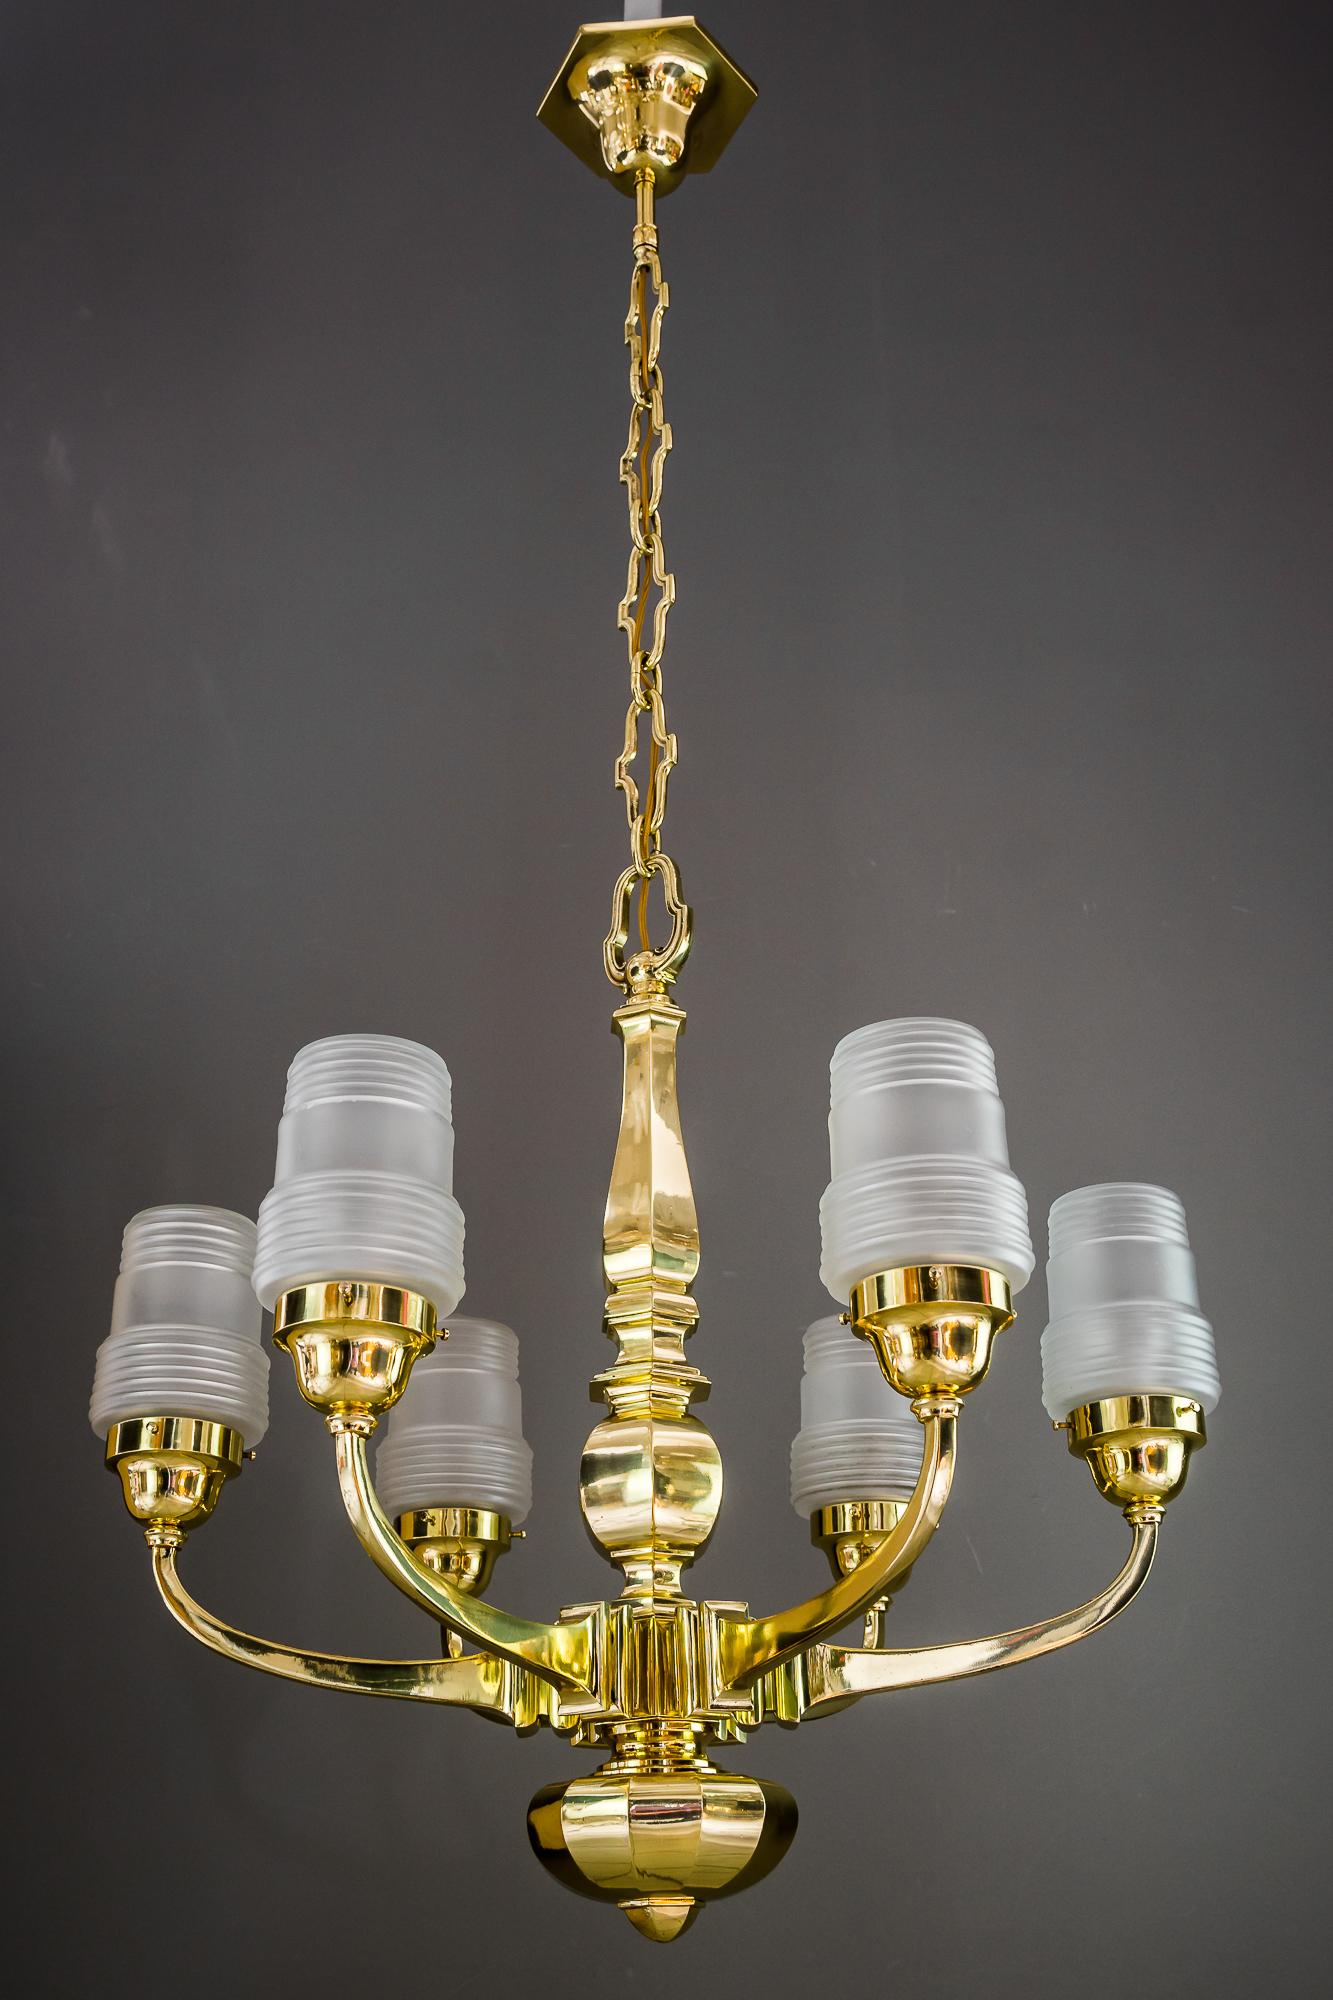 Polished Art Deco Chandelier Vienna 1920s with Original Glass Shades For Sale